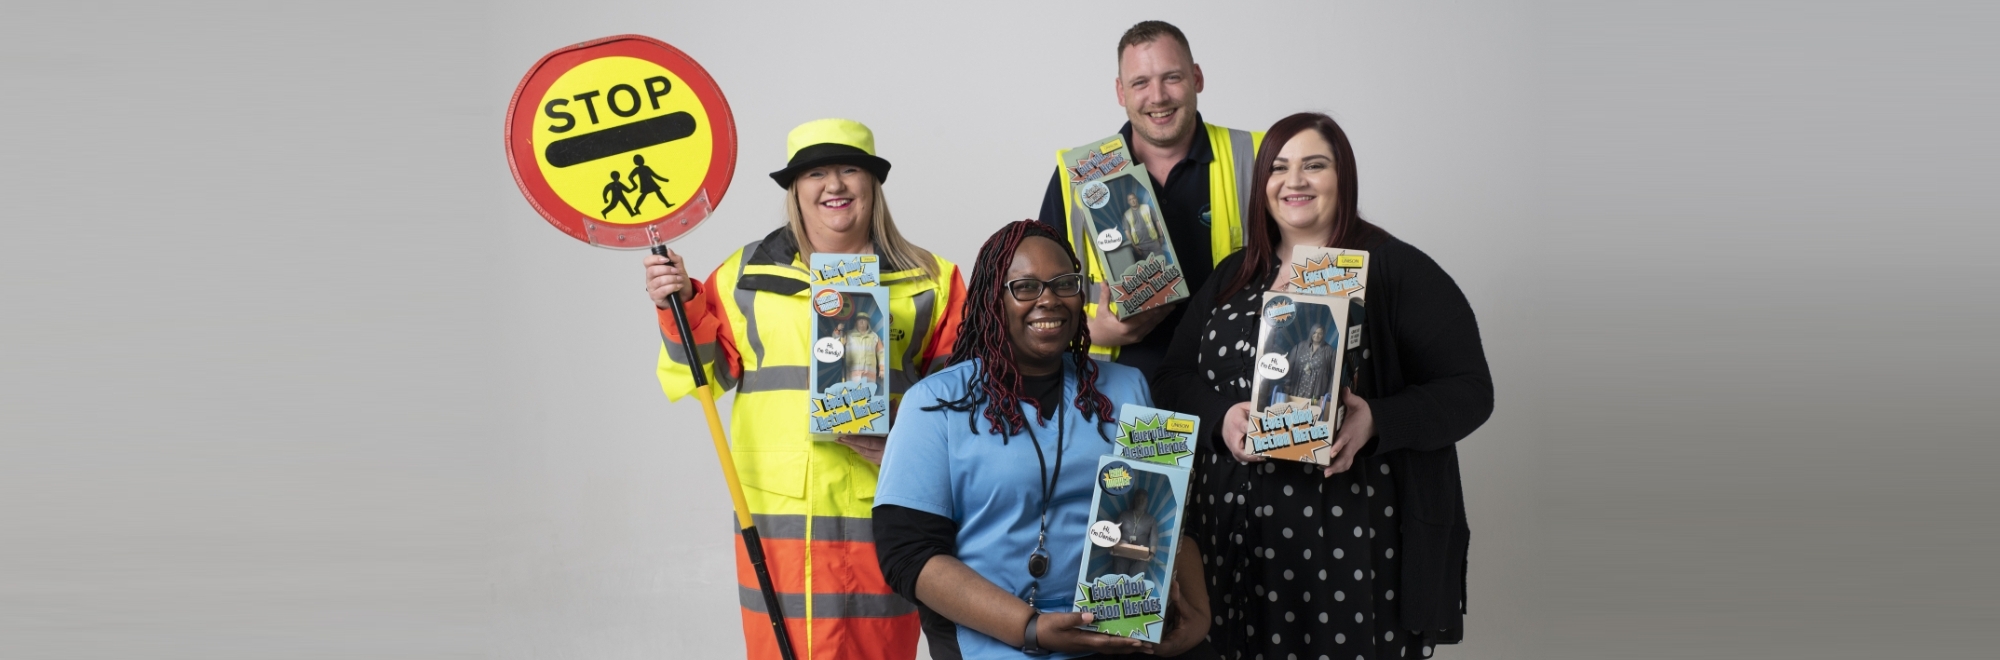 UNISON thanks community workers with their own action hero